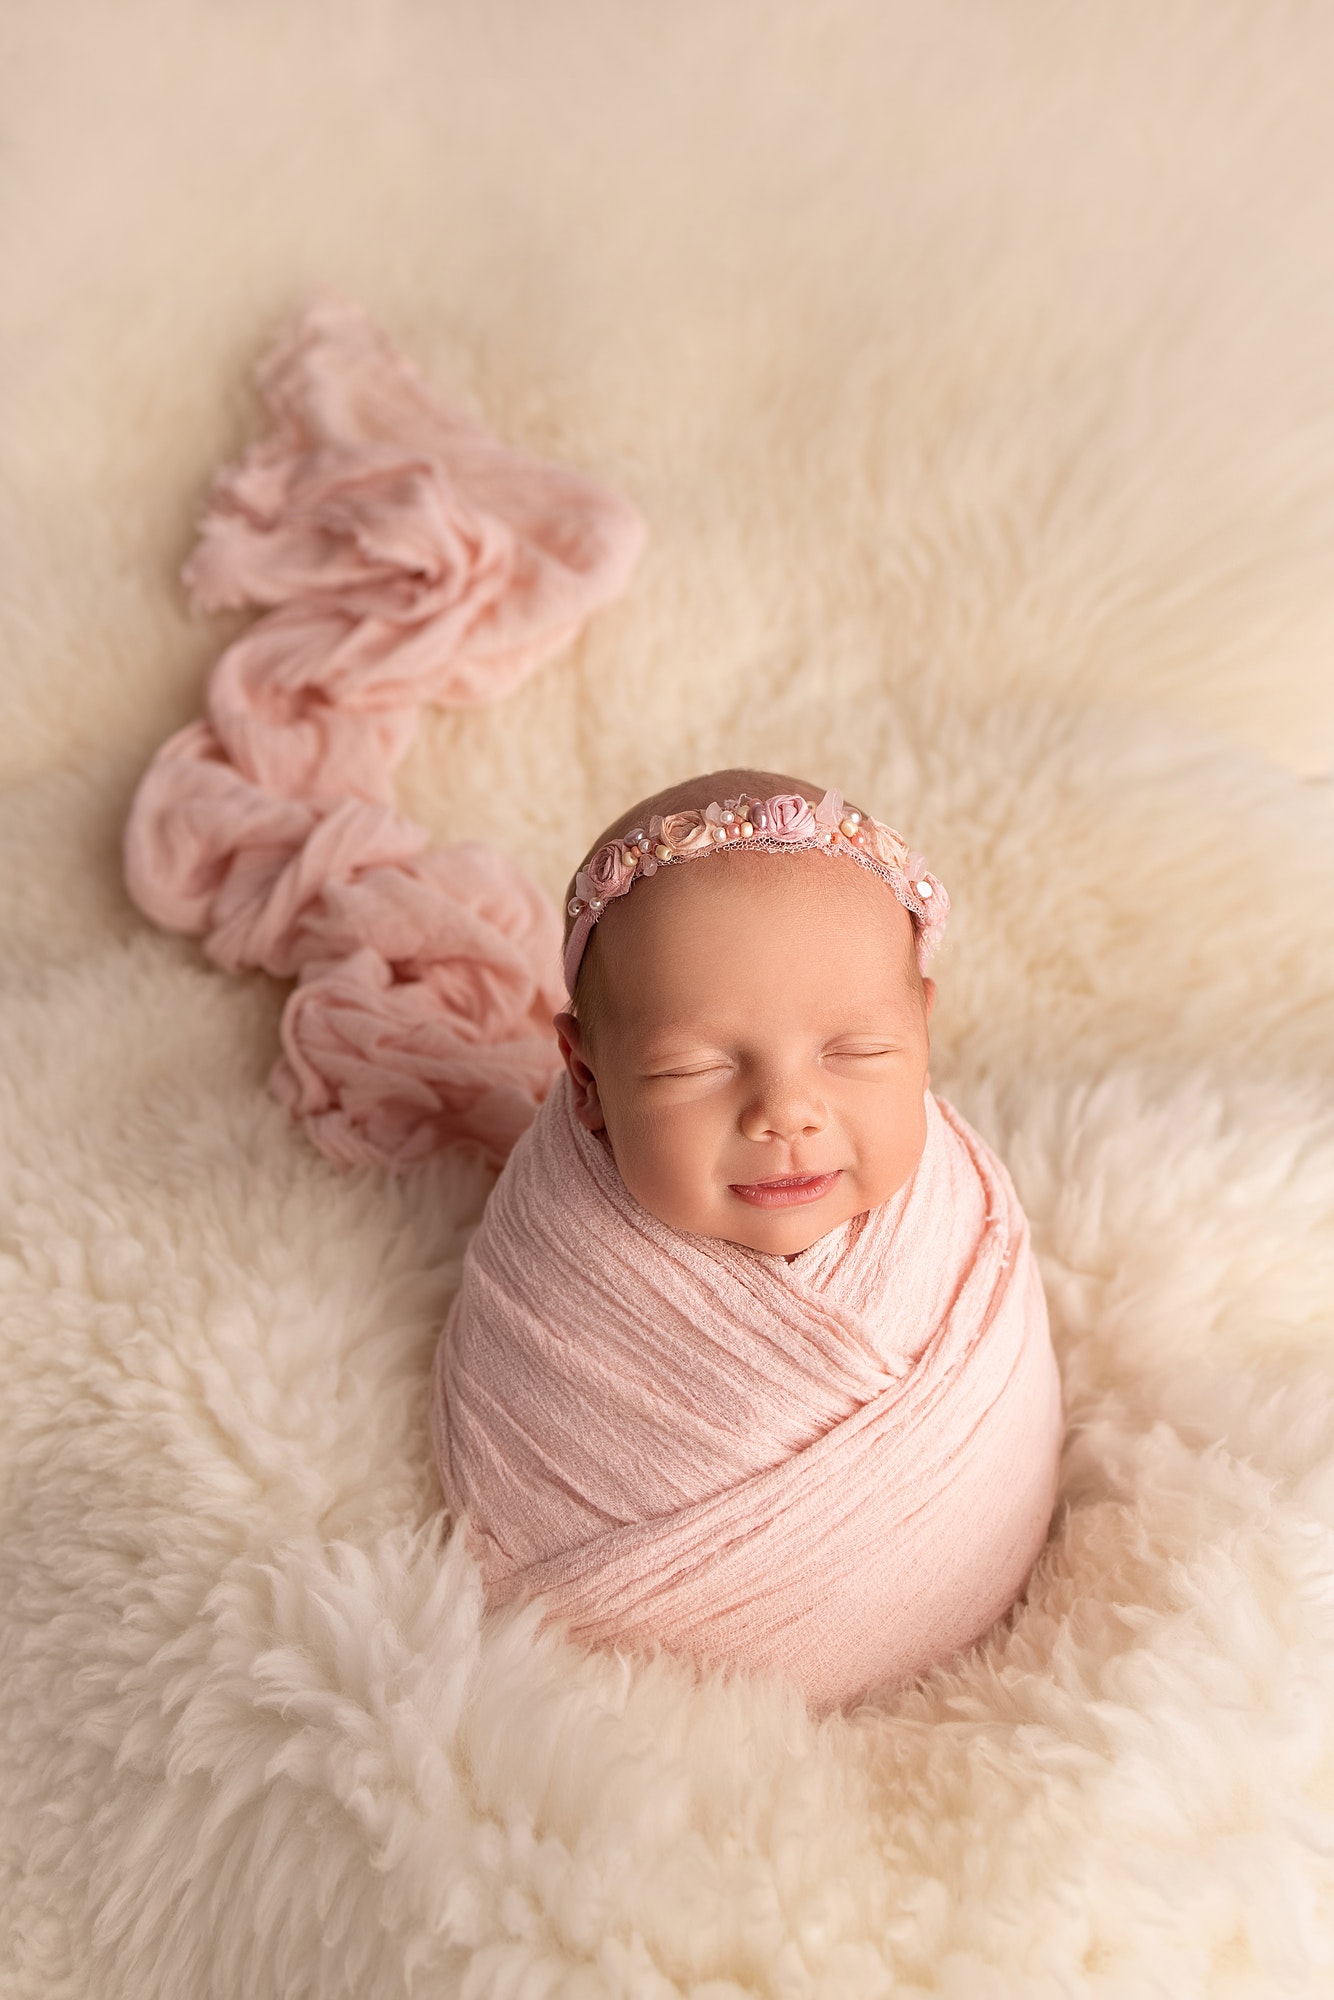 Sleeping newborn girl in a pink cocoon with a pink bandage on a white background